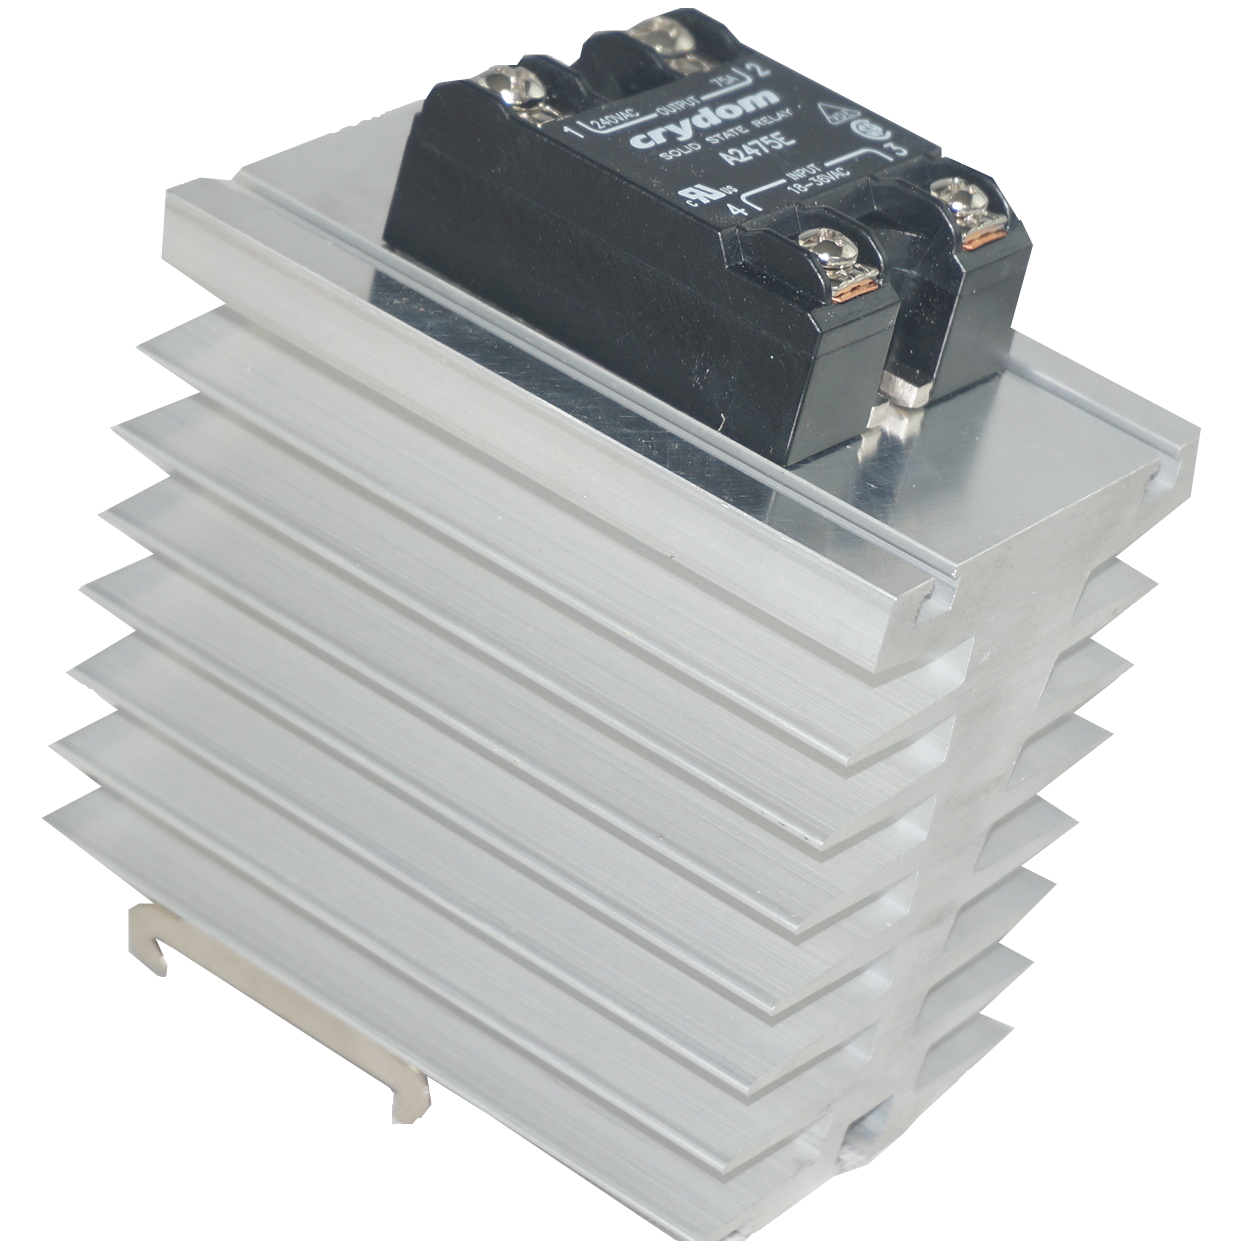 GFIN/70M-DR + D1D40, Din Rail Mount DC Solid State Relay with Heatsink 4-32VDC control, 32A @ 40 Deg C, 100VDC Load